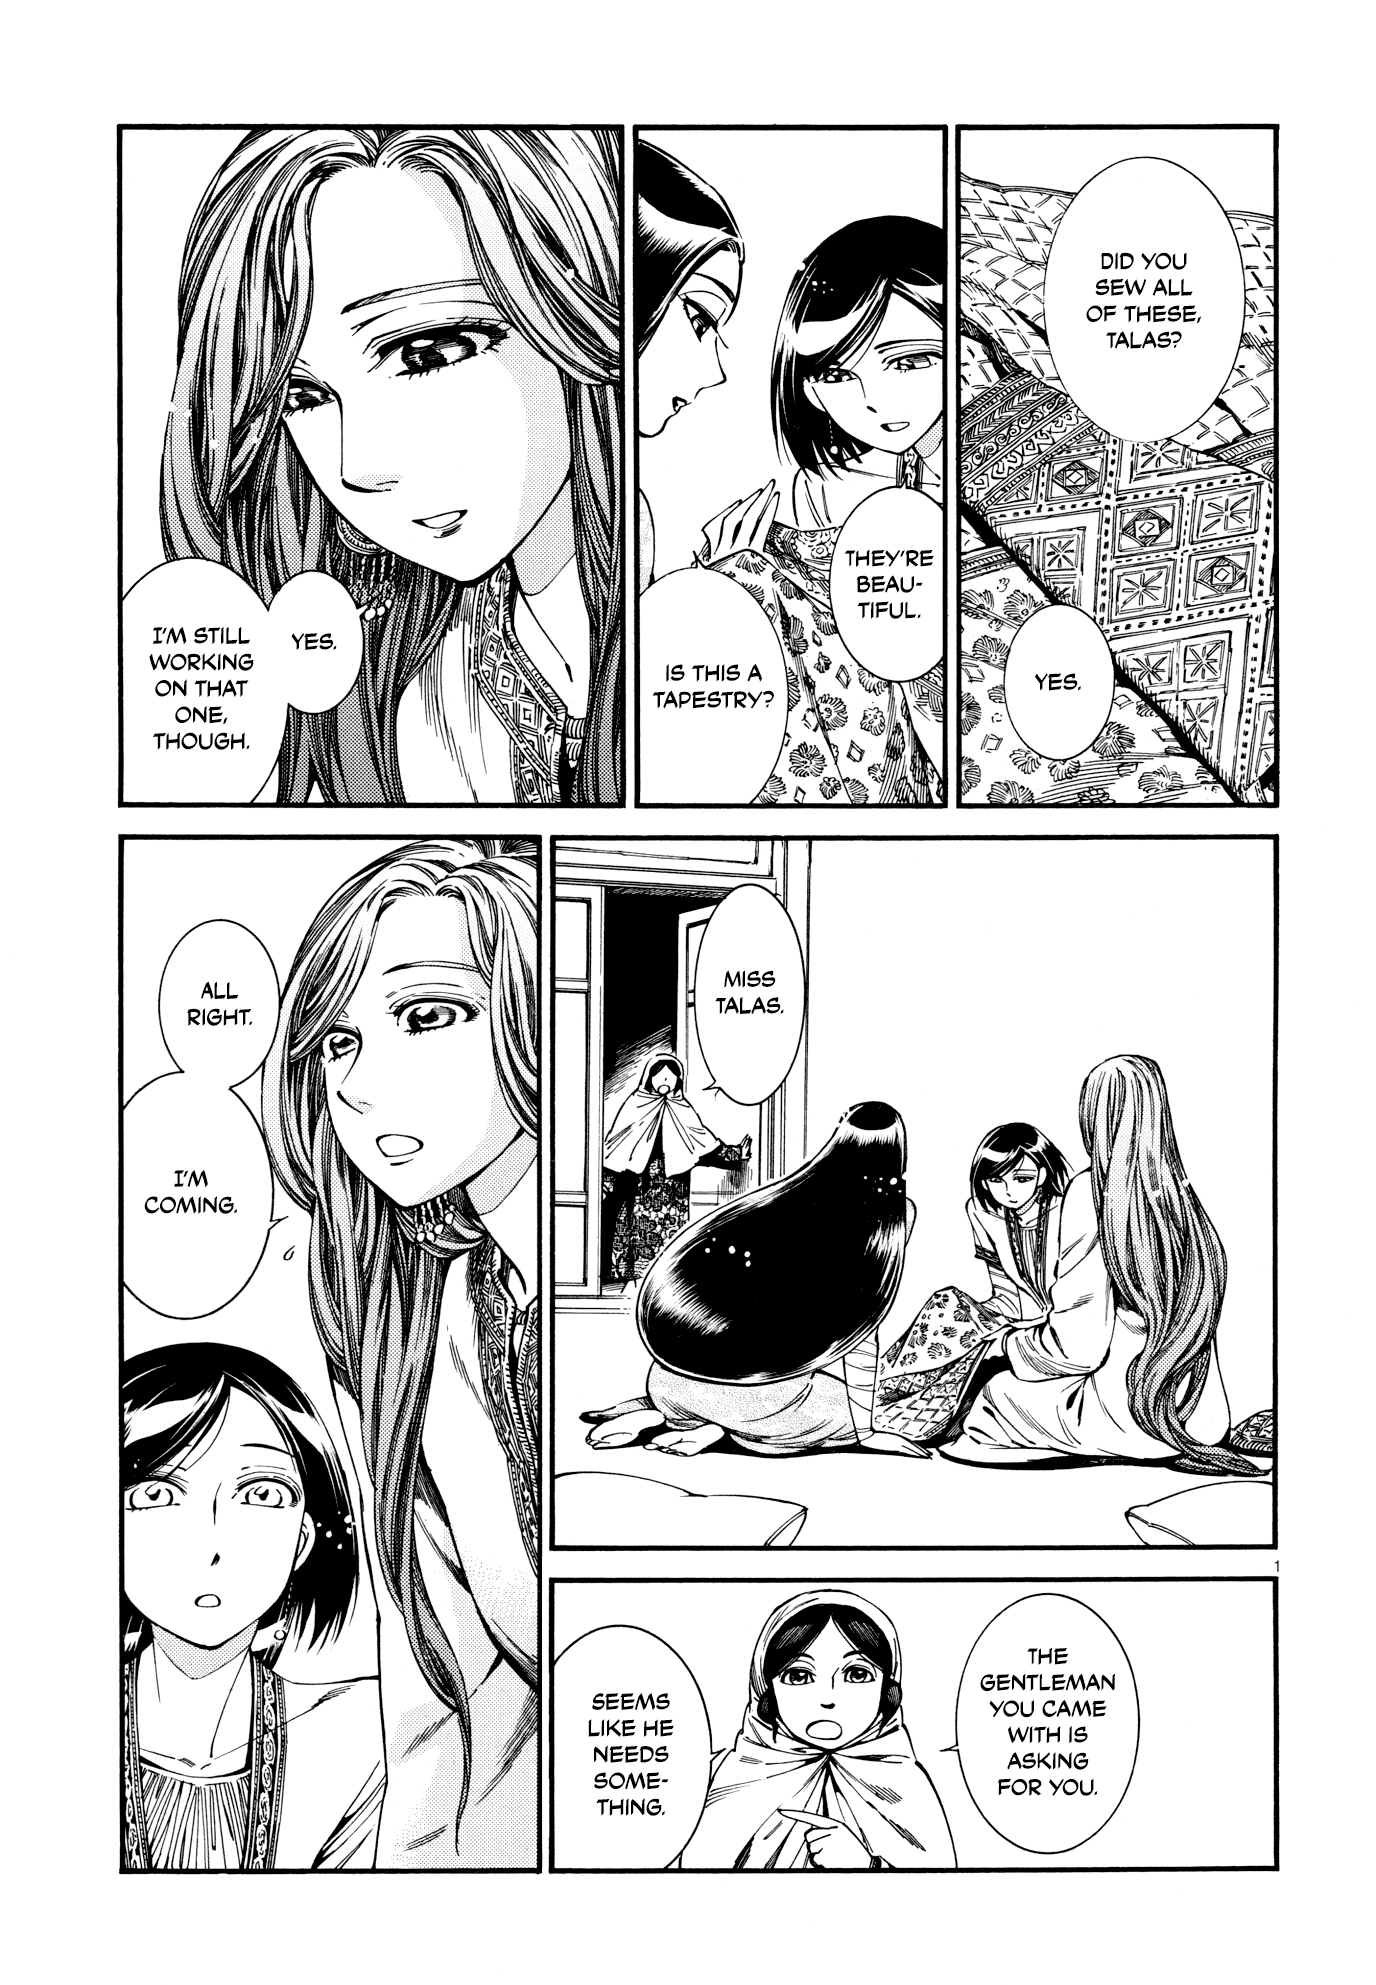 Otoyomegatari Vol.12-Chapter.85-Taking-Pictures-With-Everyone Image